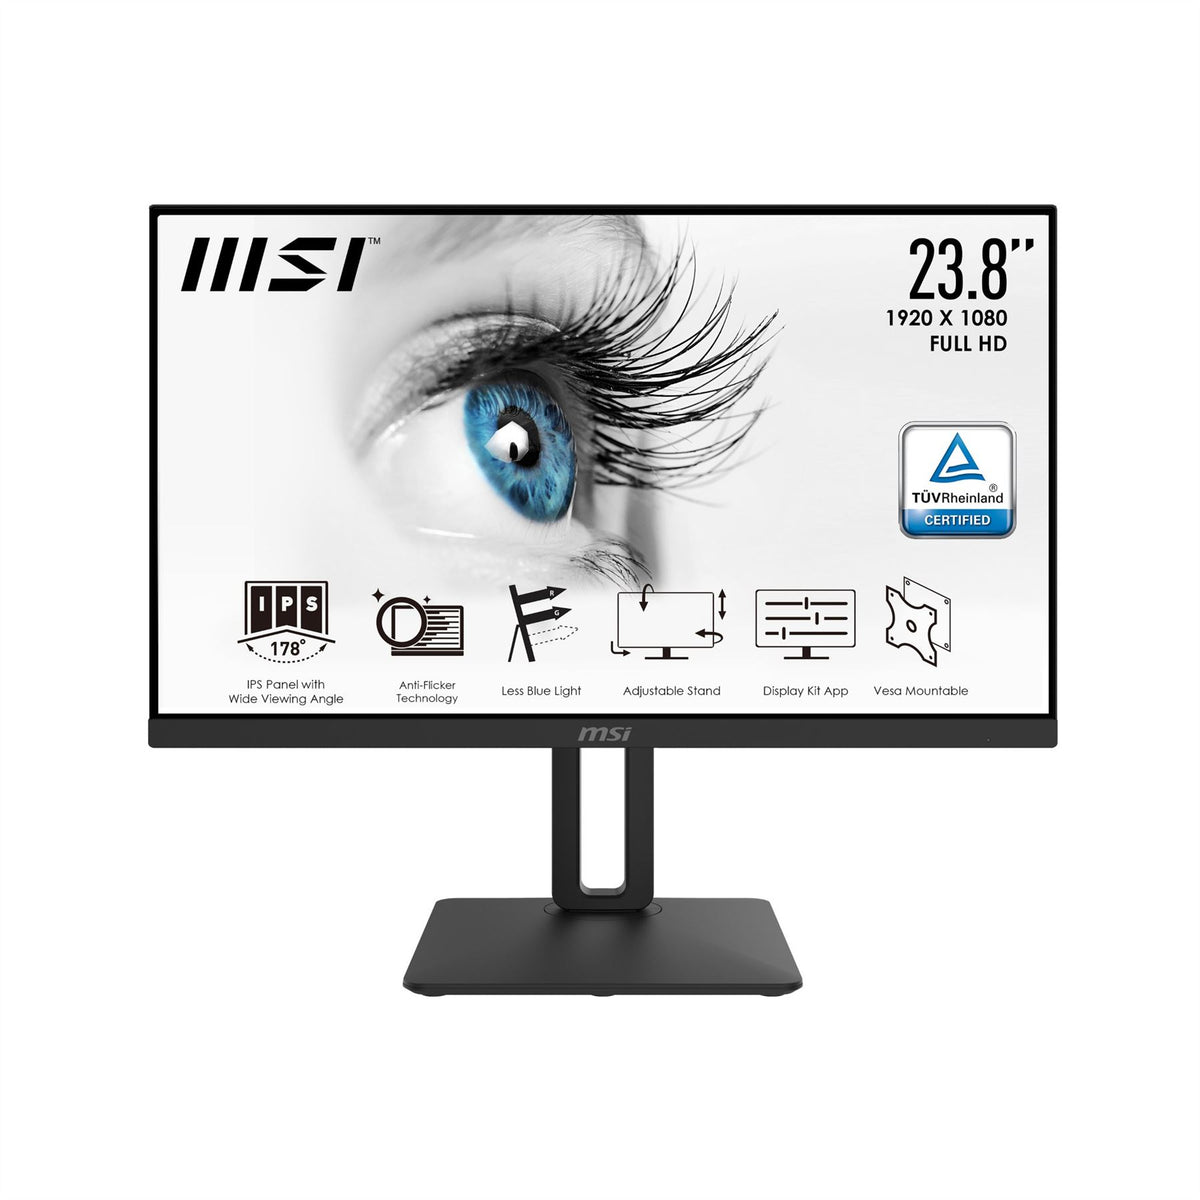 MSI Pro MP242P 23.8 Inch Monitor with Adjustable Stand, Full HD (1920 x 1080), 75Hz, IPS, 5ms, HDMI, VGA, Built-in Speakers, Anti-